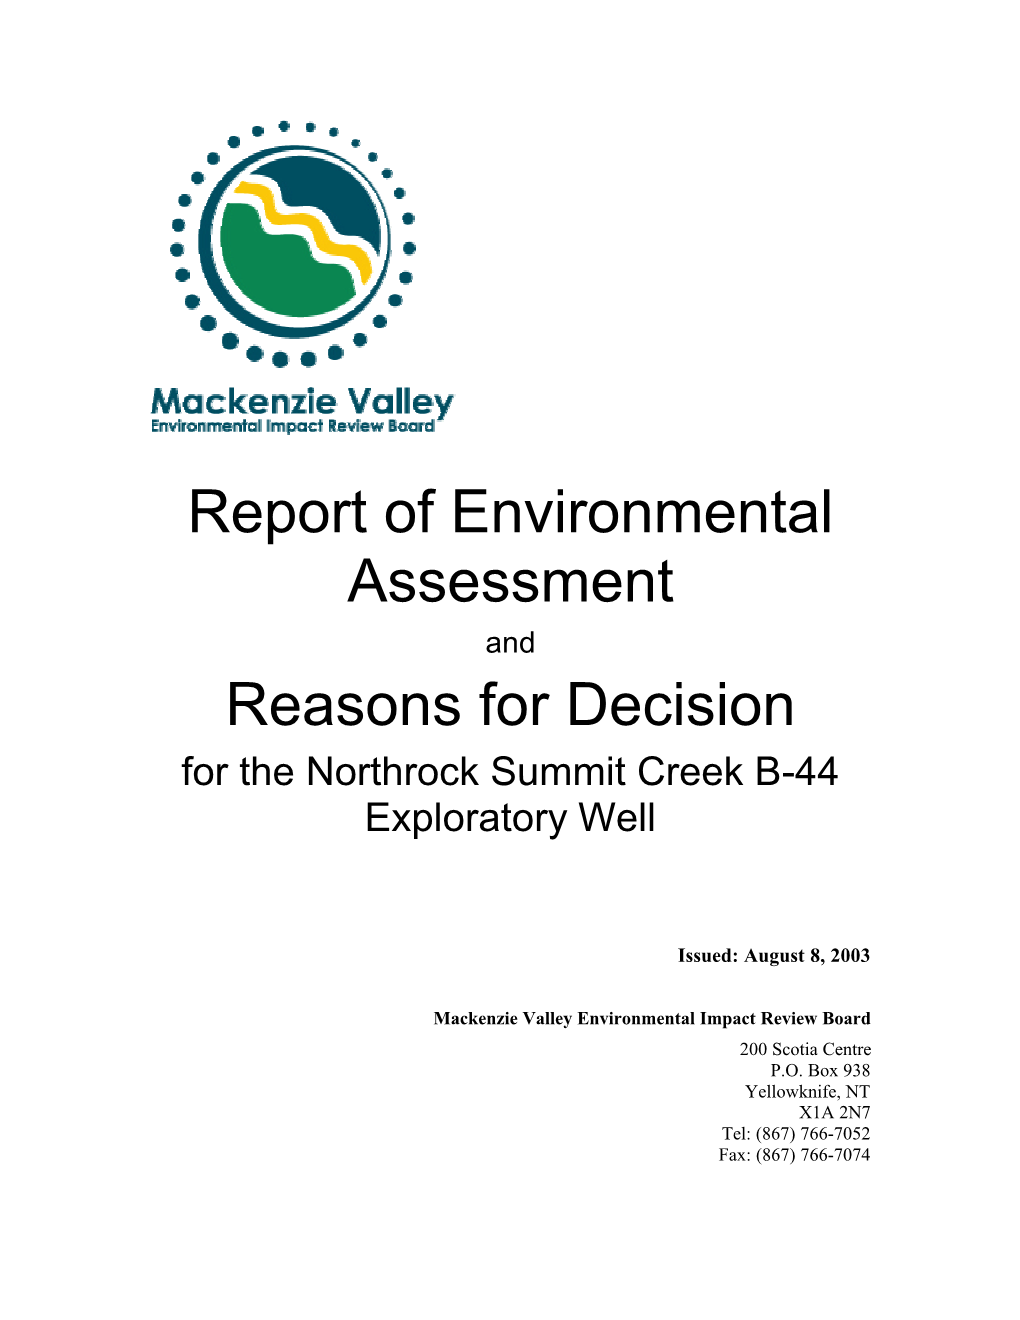 Report of Environmental Assessment and Reasons for Decision for the Northrock Summit Creek B-44 Exploratory Well